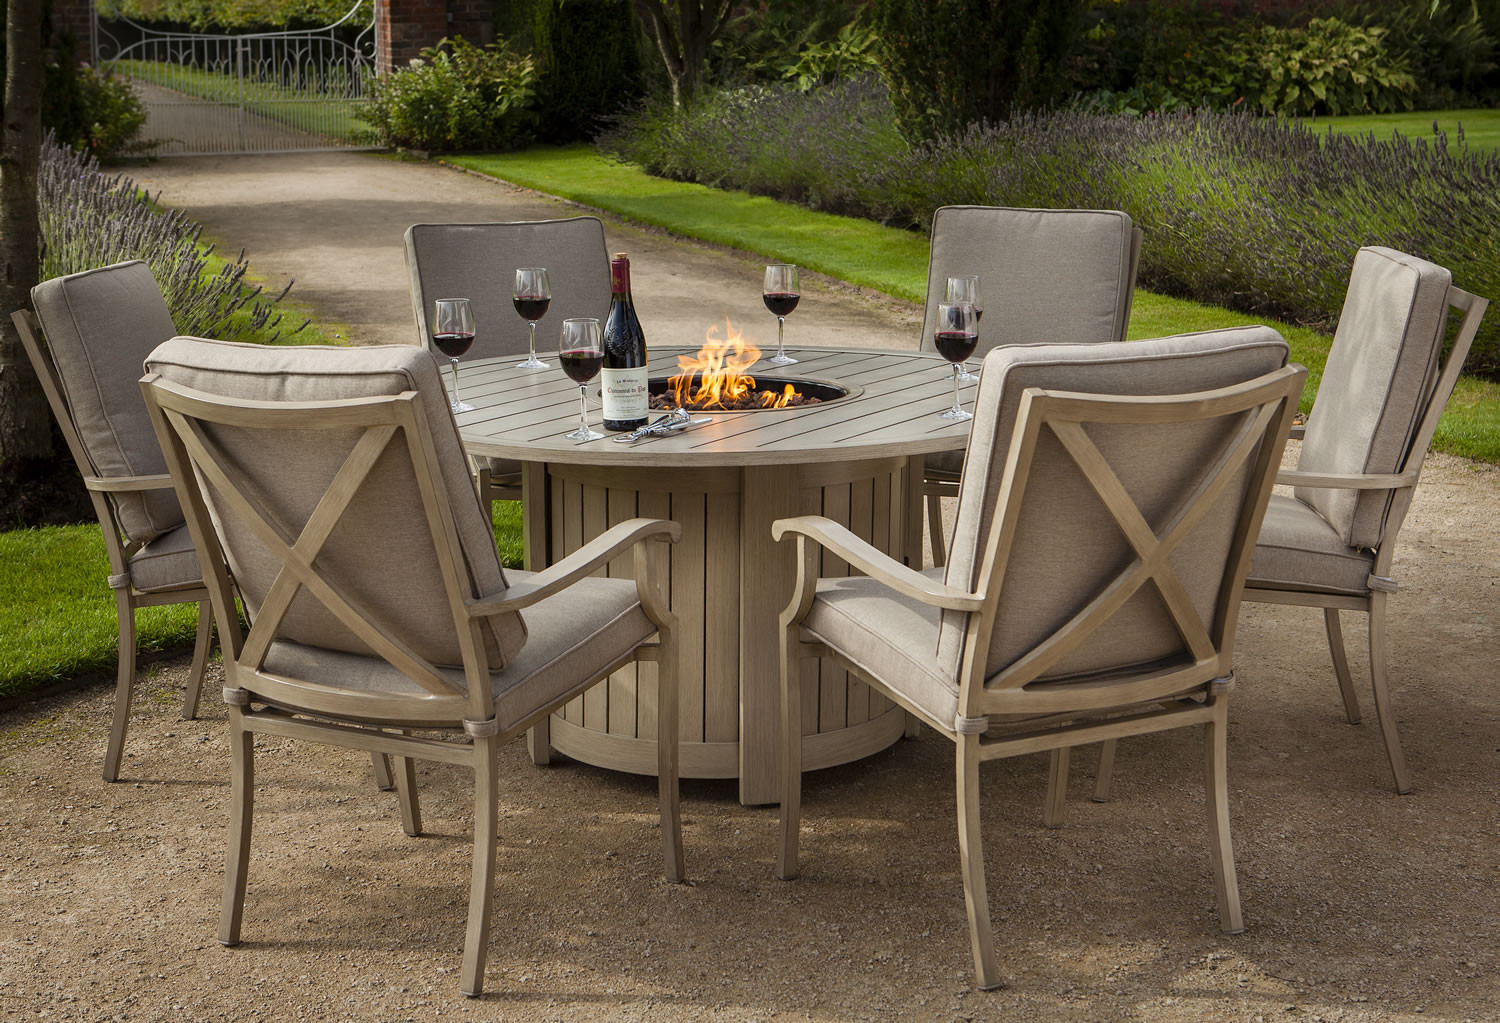 Fire Pit Dining Table Set
 Portland Round 6 Seater Dining Set with Fire Pit £1 650